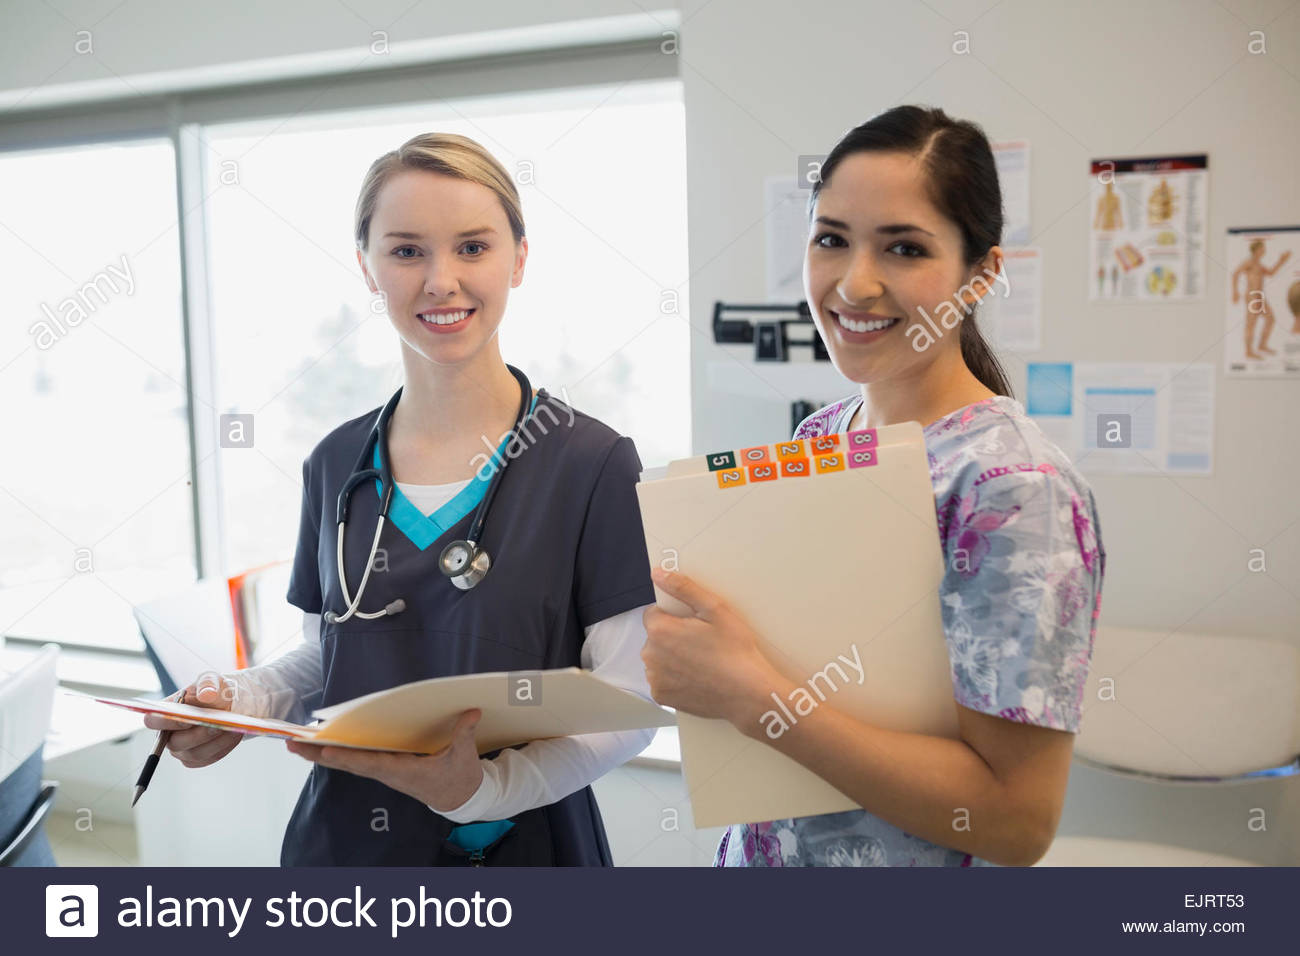 Portrait of smiling nurses with medical charts Stock Photo